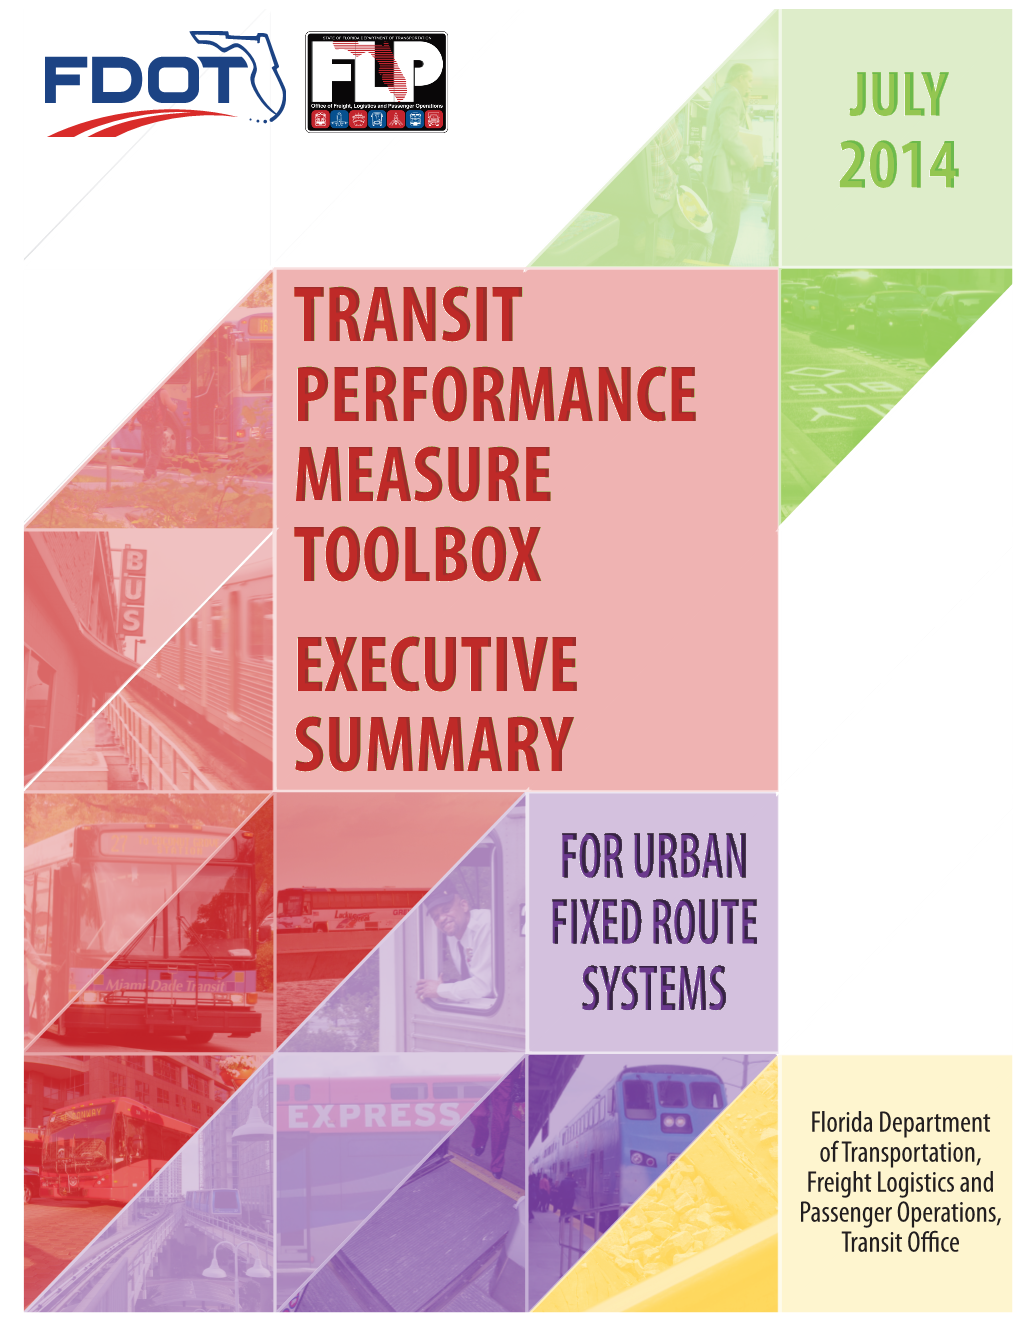 Transit Performance Measure Toolbox Executive Summary for Urban Fixed Route Systems